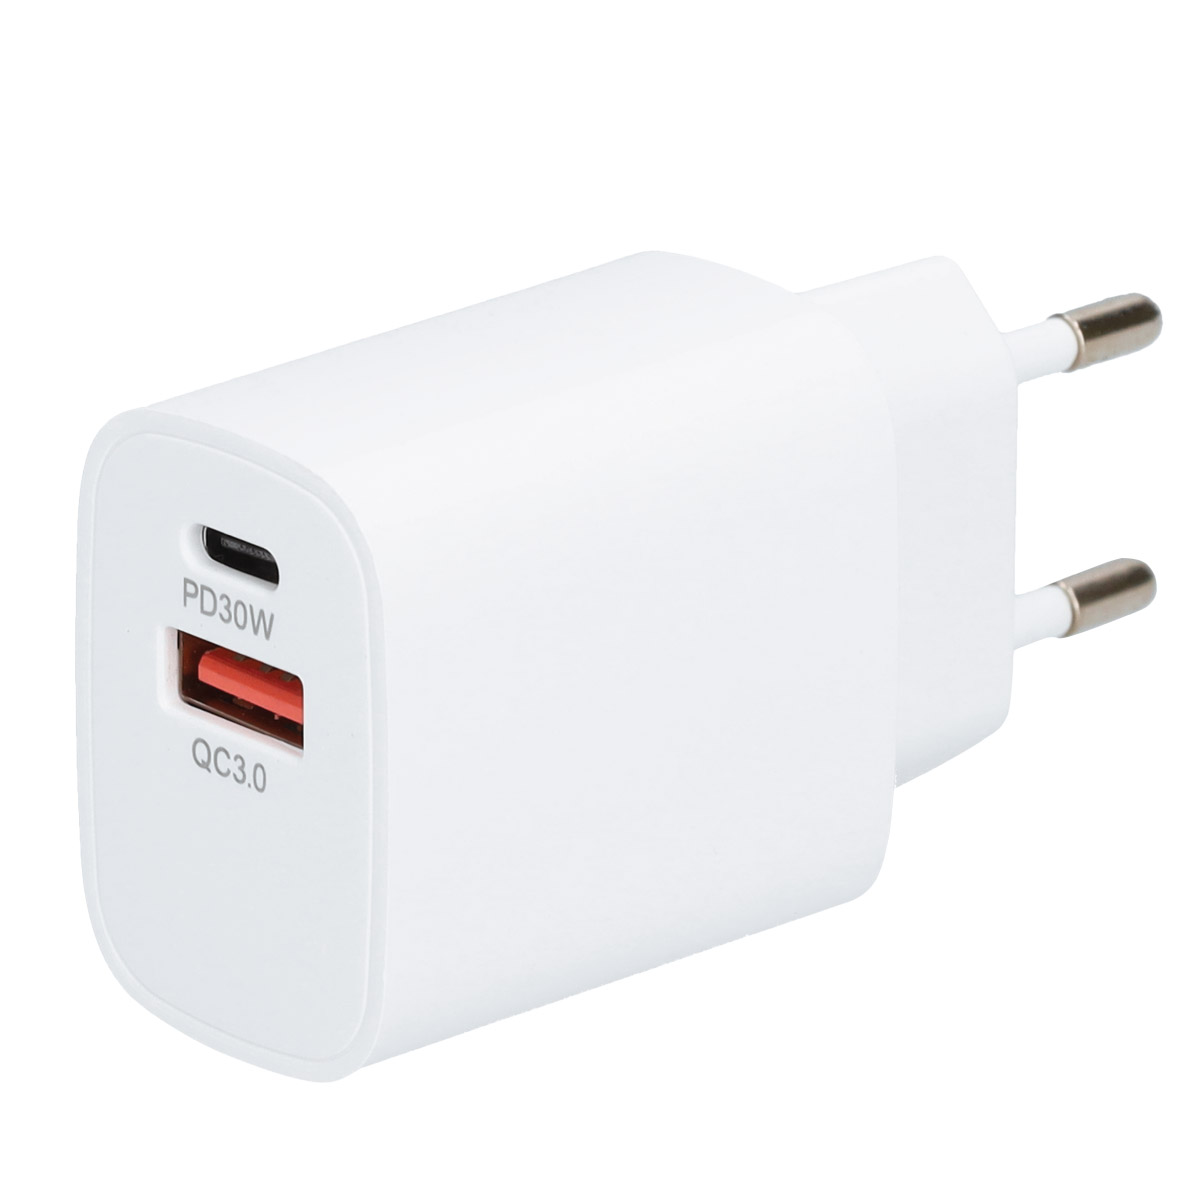 PD20W Wall Charger USB C